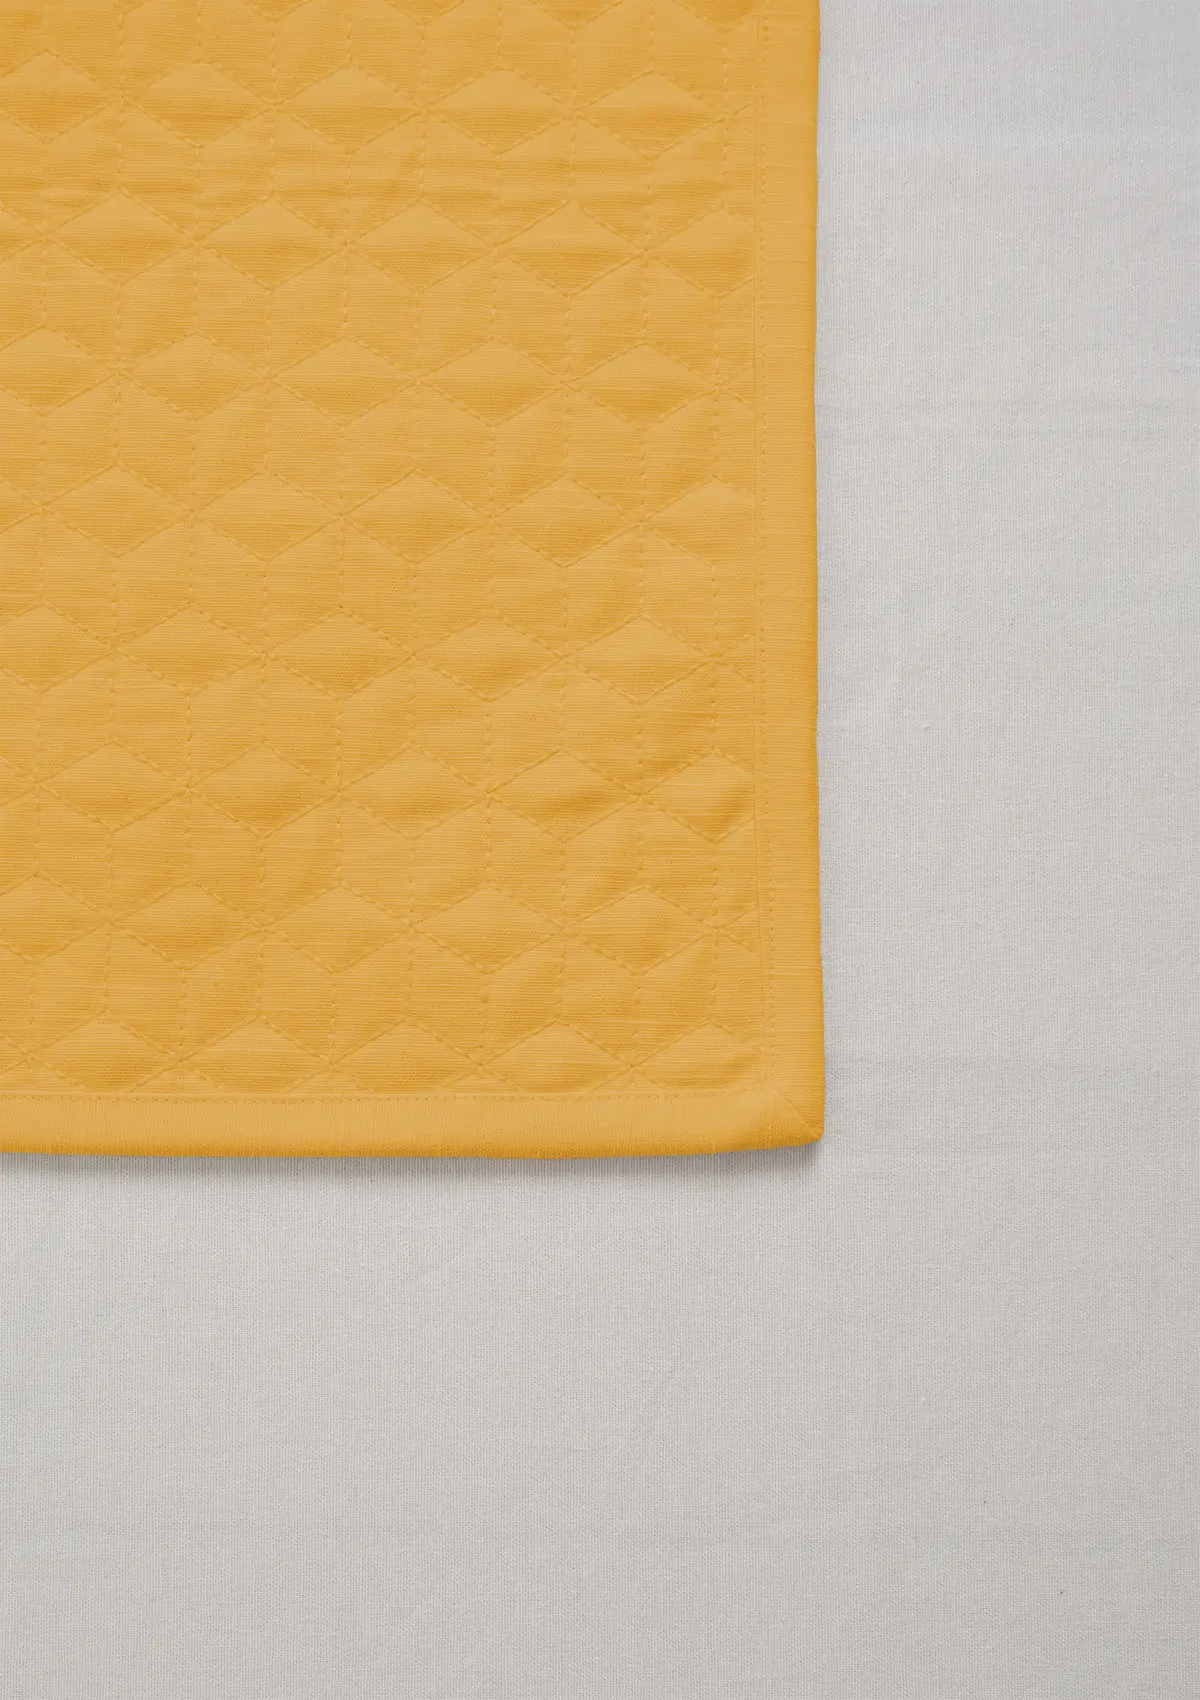 Solid Mustard 100% Cotton Quilted Placemat for 4 Seater or 6 Seater Dining